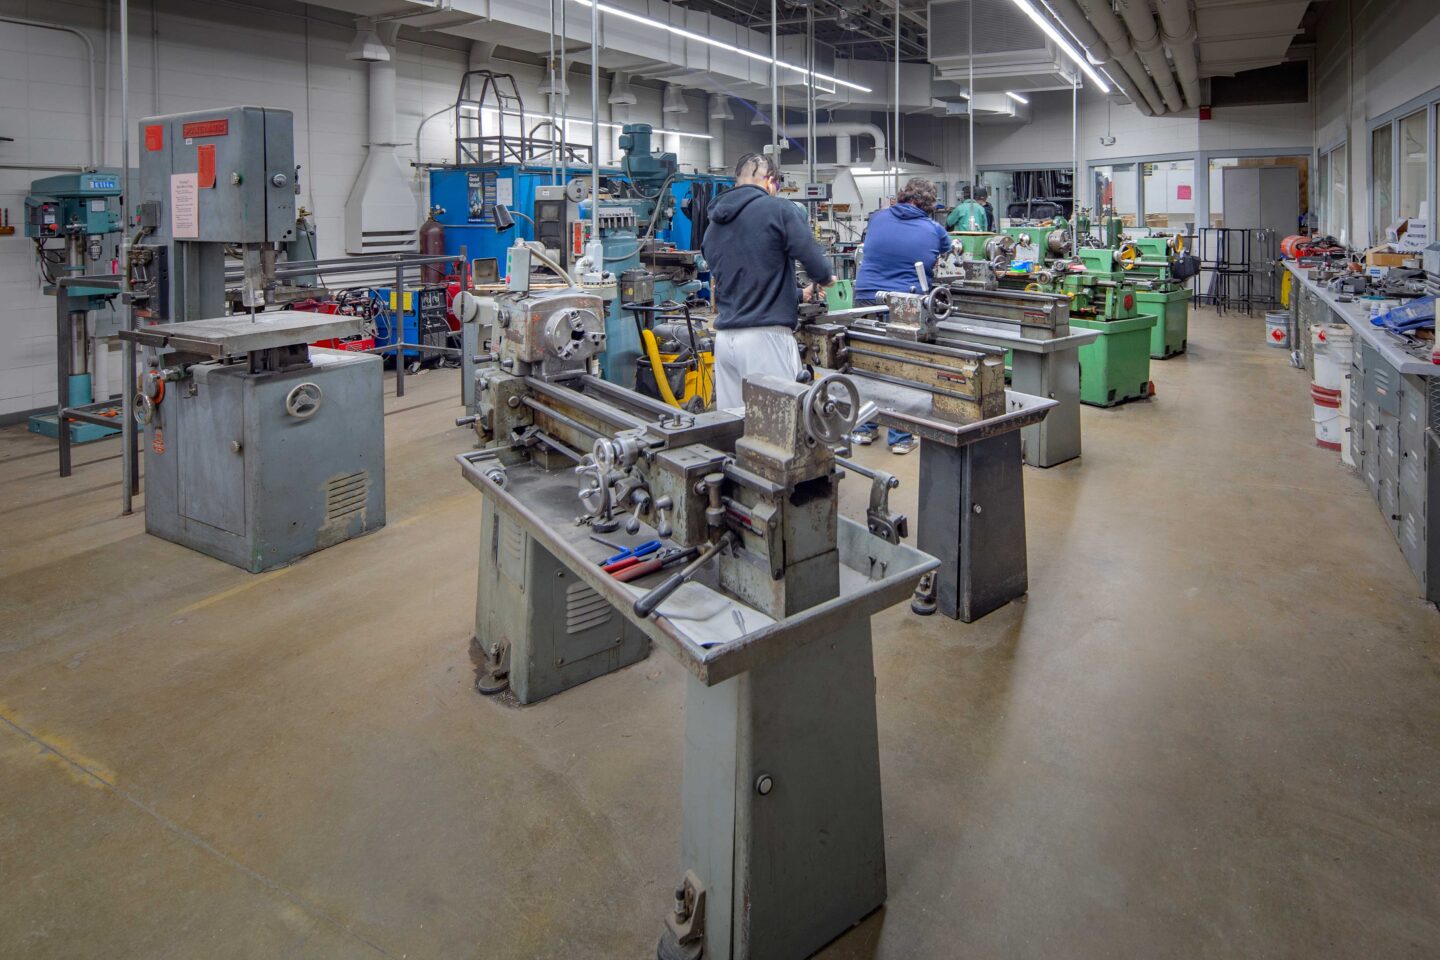 high school metal shop with workstations